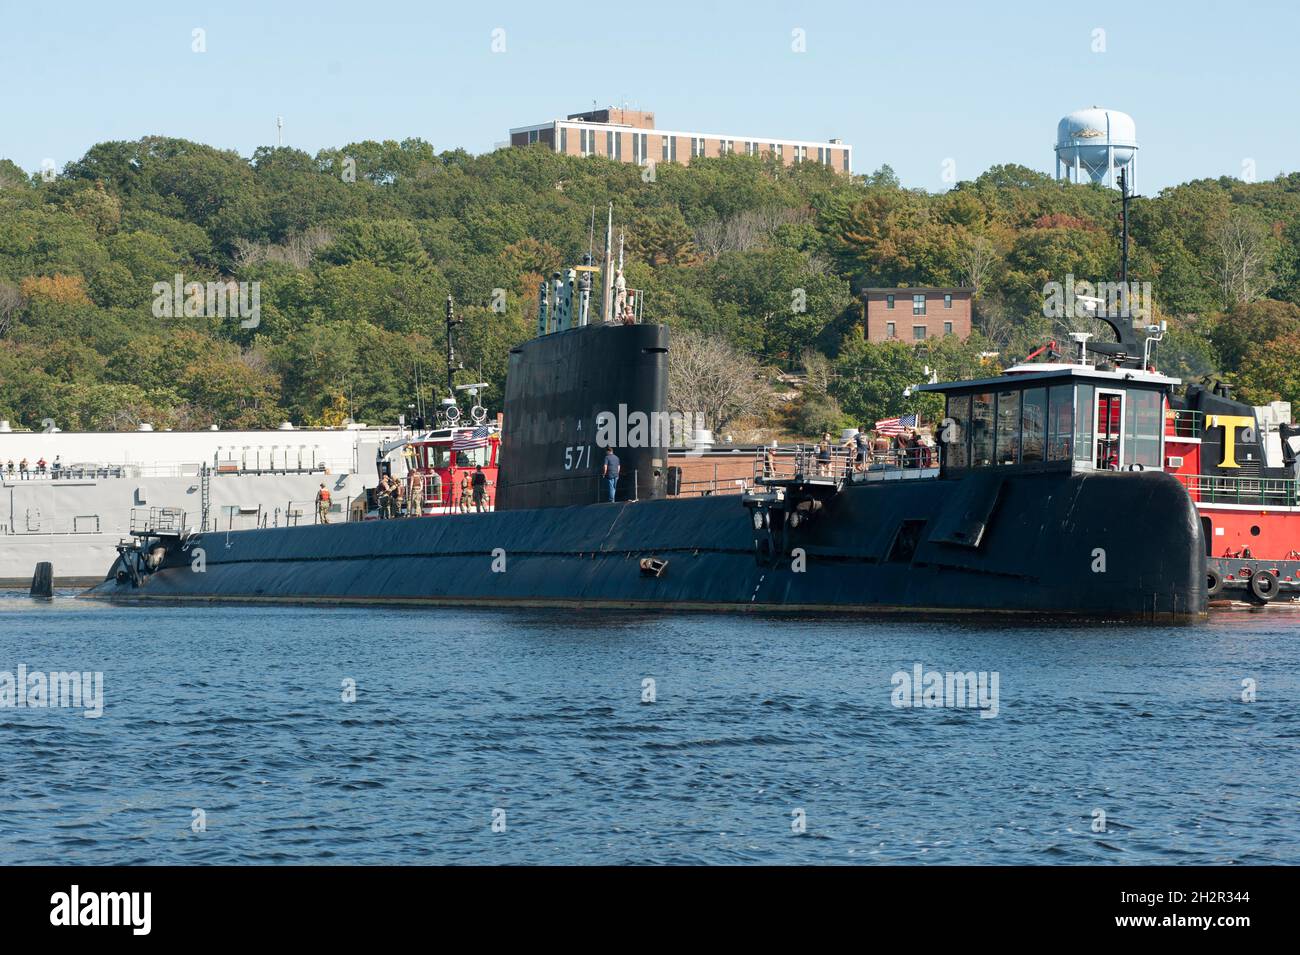 Groton, United States. 15 October, 2021. The U.S. Navy Historic Ship USS Nautilus, is moved into dry dock at Submarine Base New London October 15, 2021 in Groton, Connecticut. Nautilus, was the first nuclear-powered submarine and current Submarine Force Museum centerpiece, and will begin an $36-million dollar preservation project. Credit: John Narewski/U.S. Navy/Alamy Live News Stock Photo